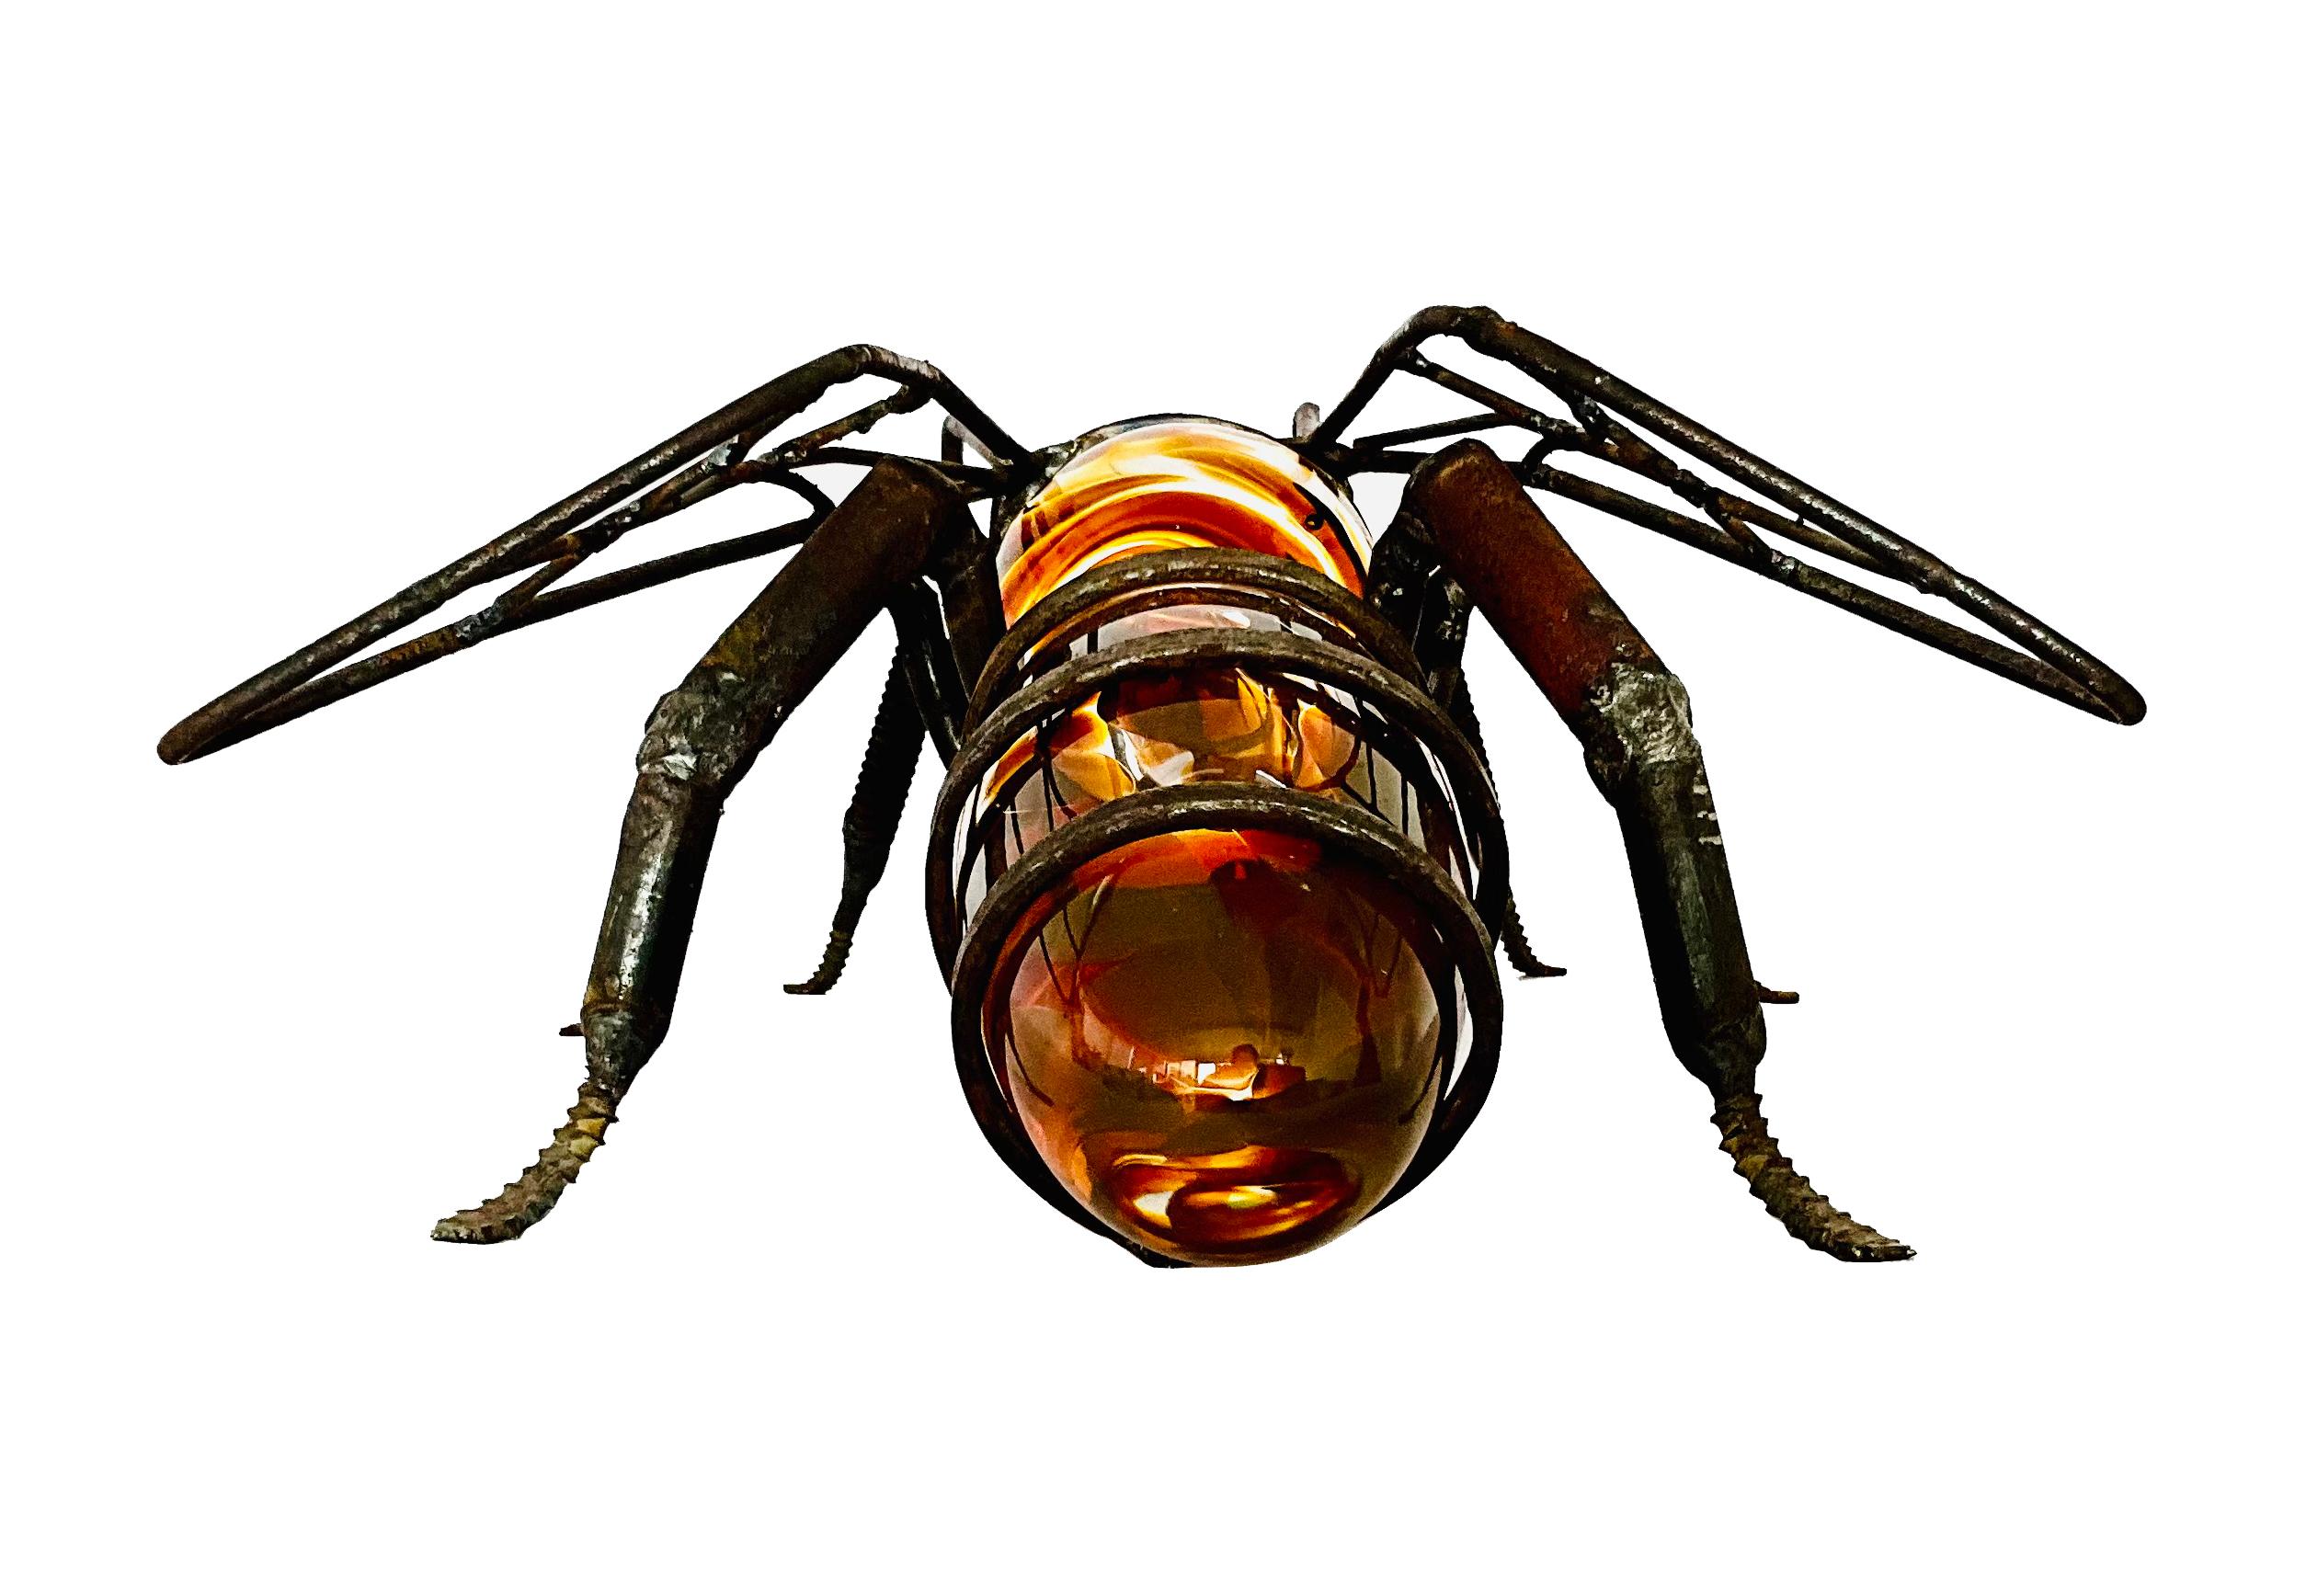 Hand-Blown Glass Bee, Recycled Steel and Crystal Parts - Black Still-Life Sculpture by Marcos Romero Gallardo